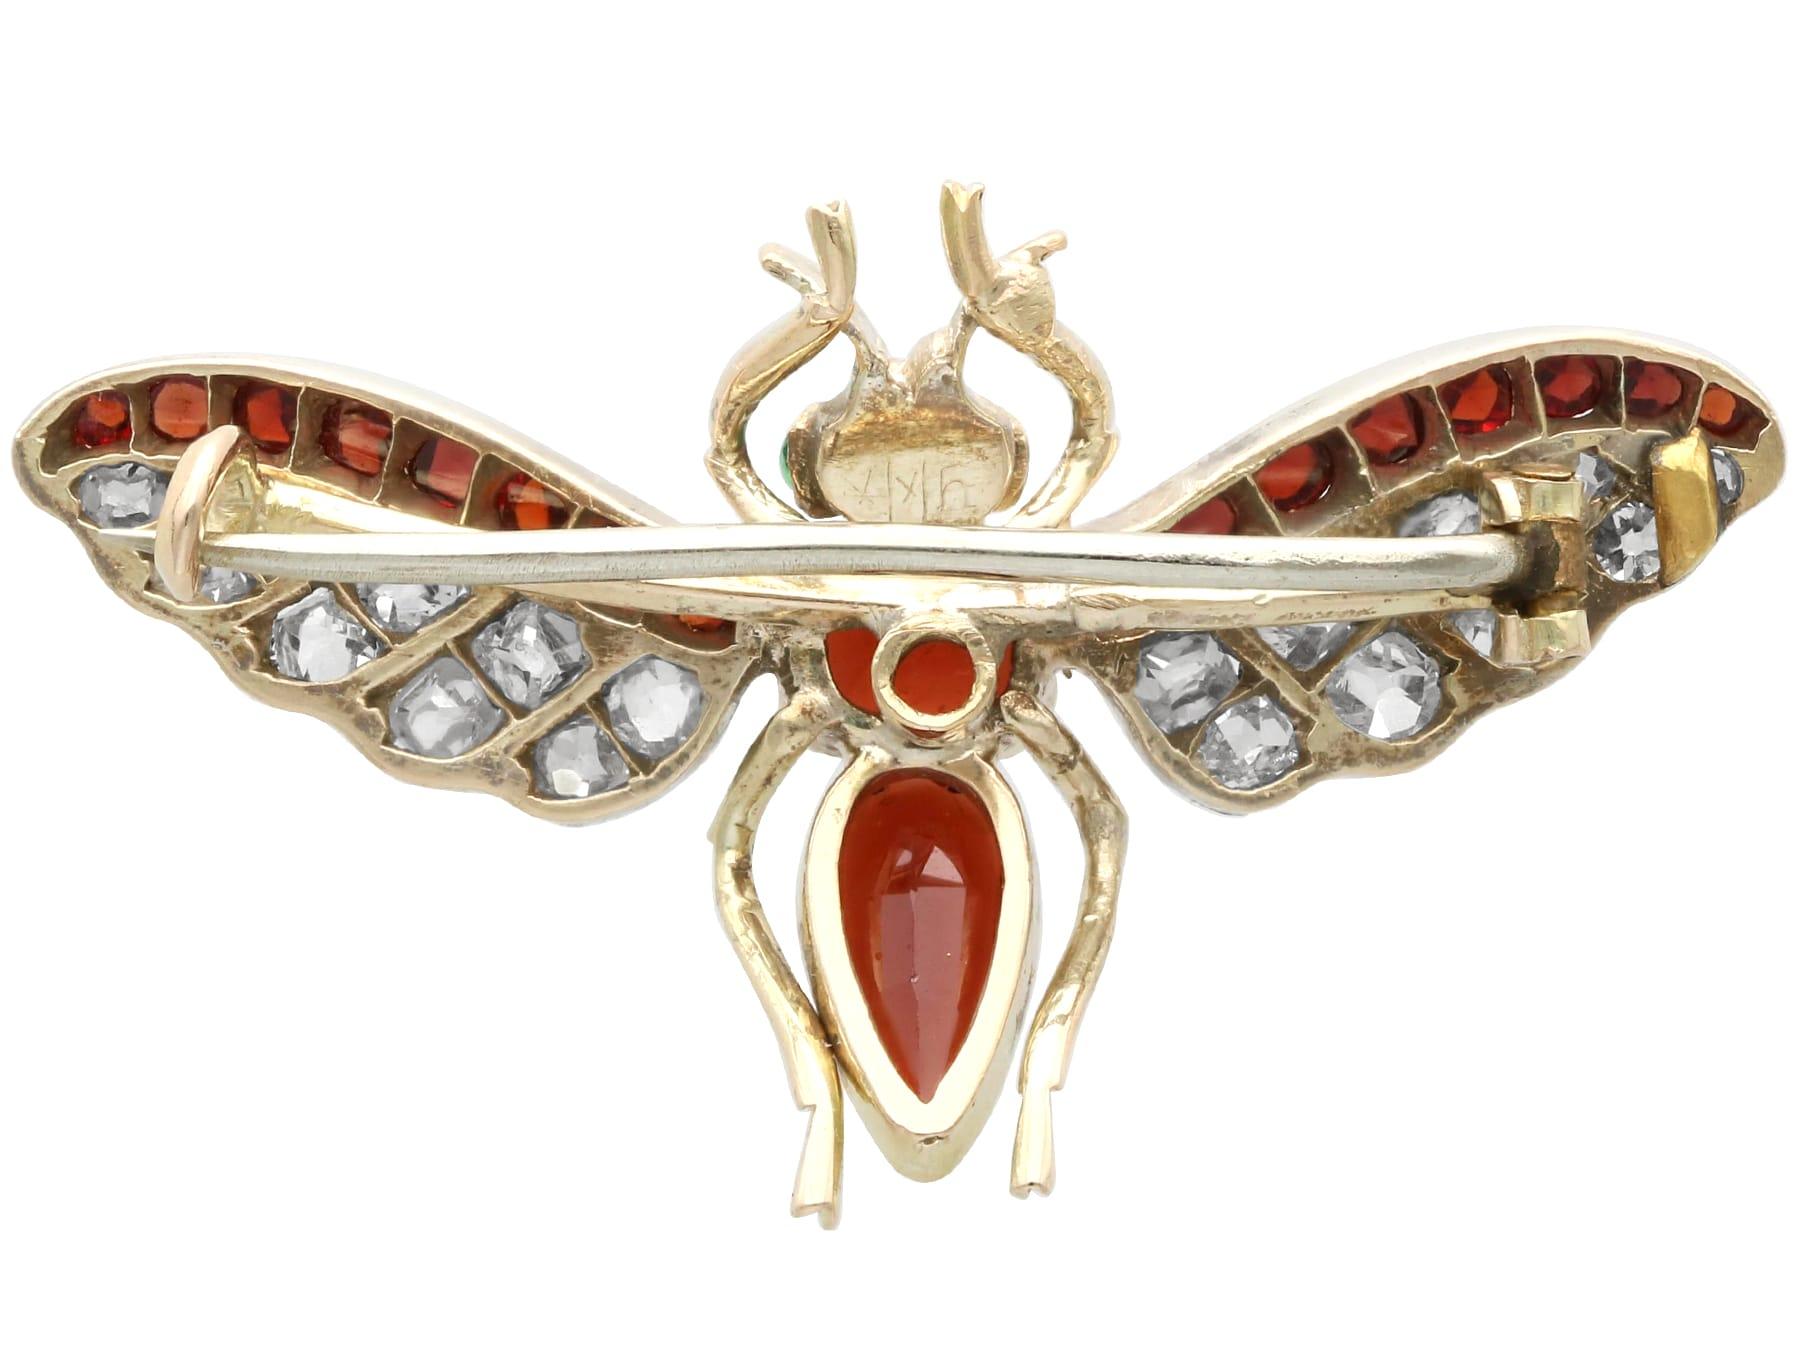 Antique 2.13 Carat Garnet Diamond and Emerald Yellow Gold Insect Pendant For Sale 3